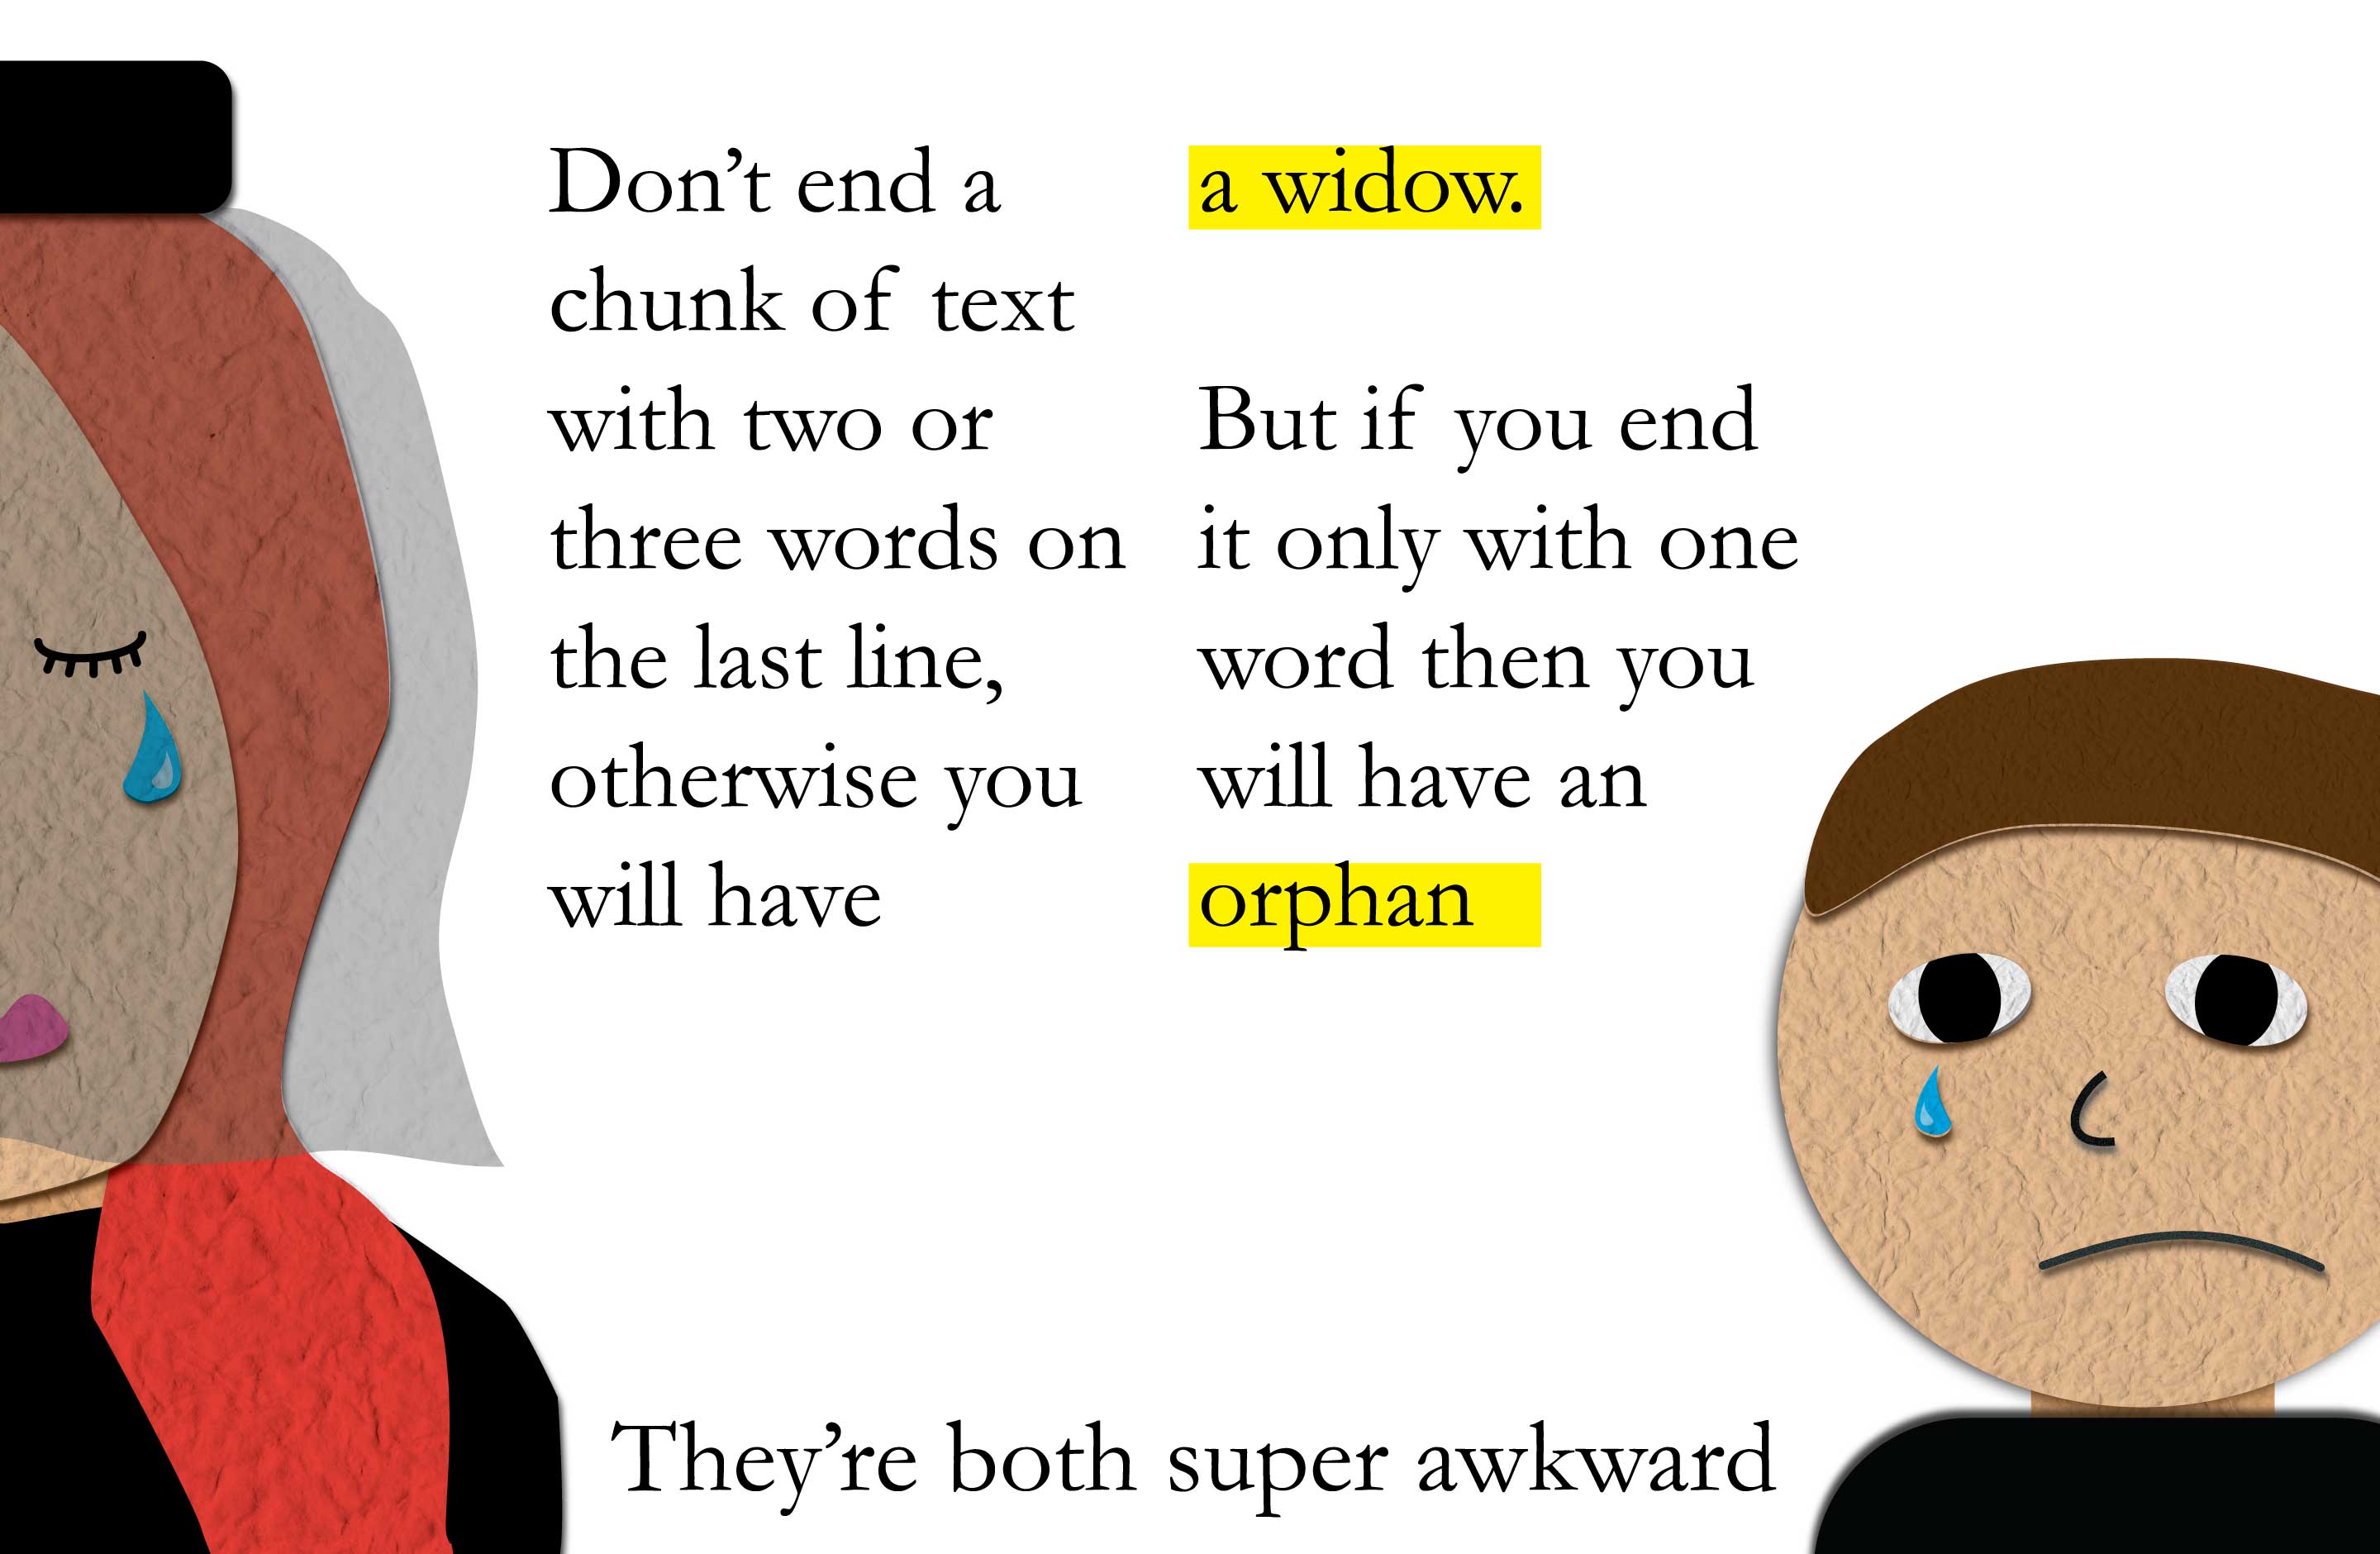 microsoft word widows and orphans